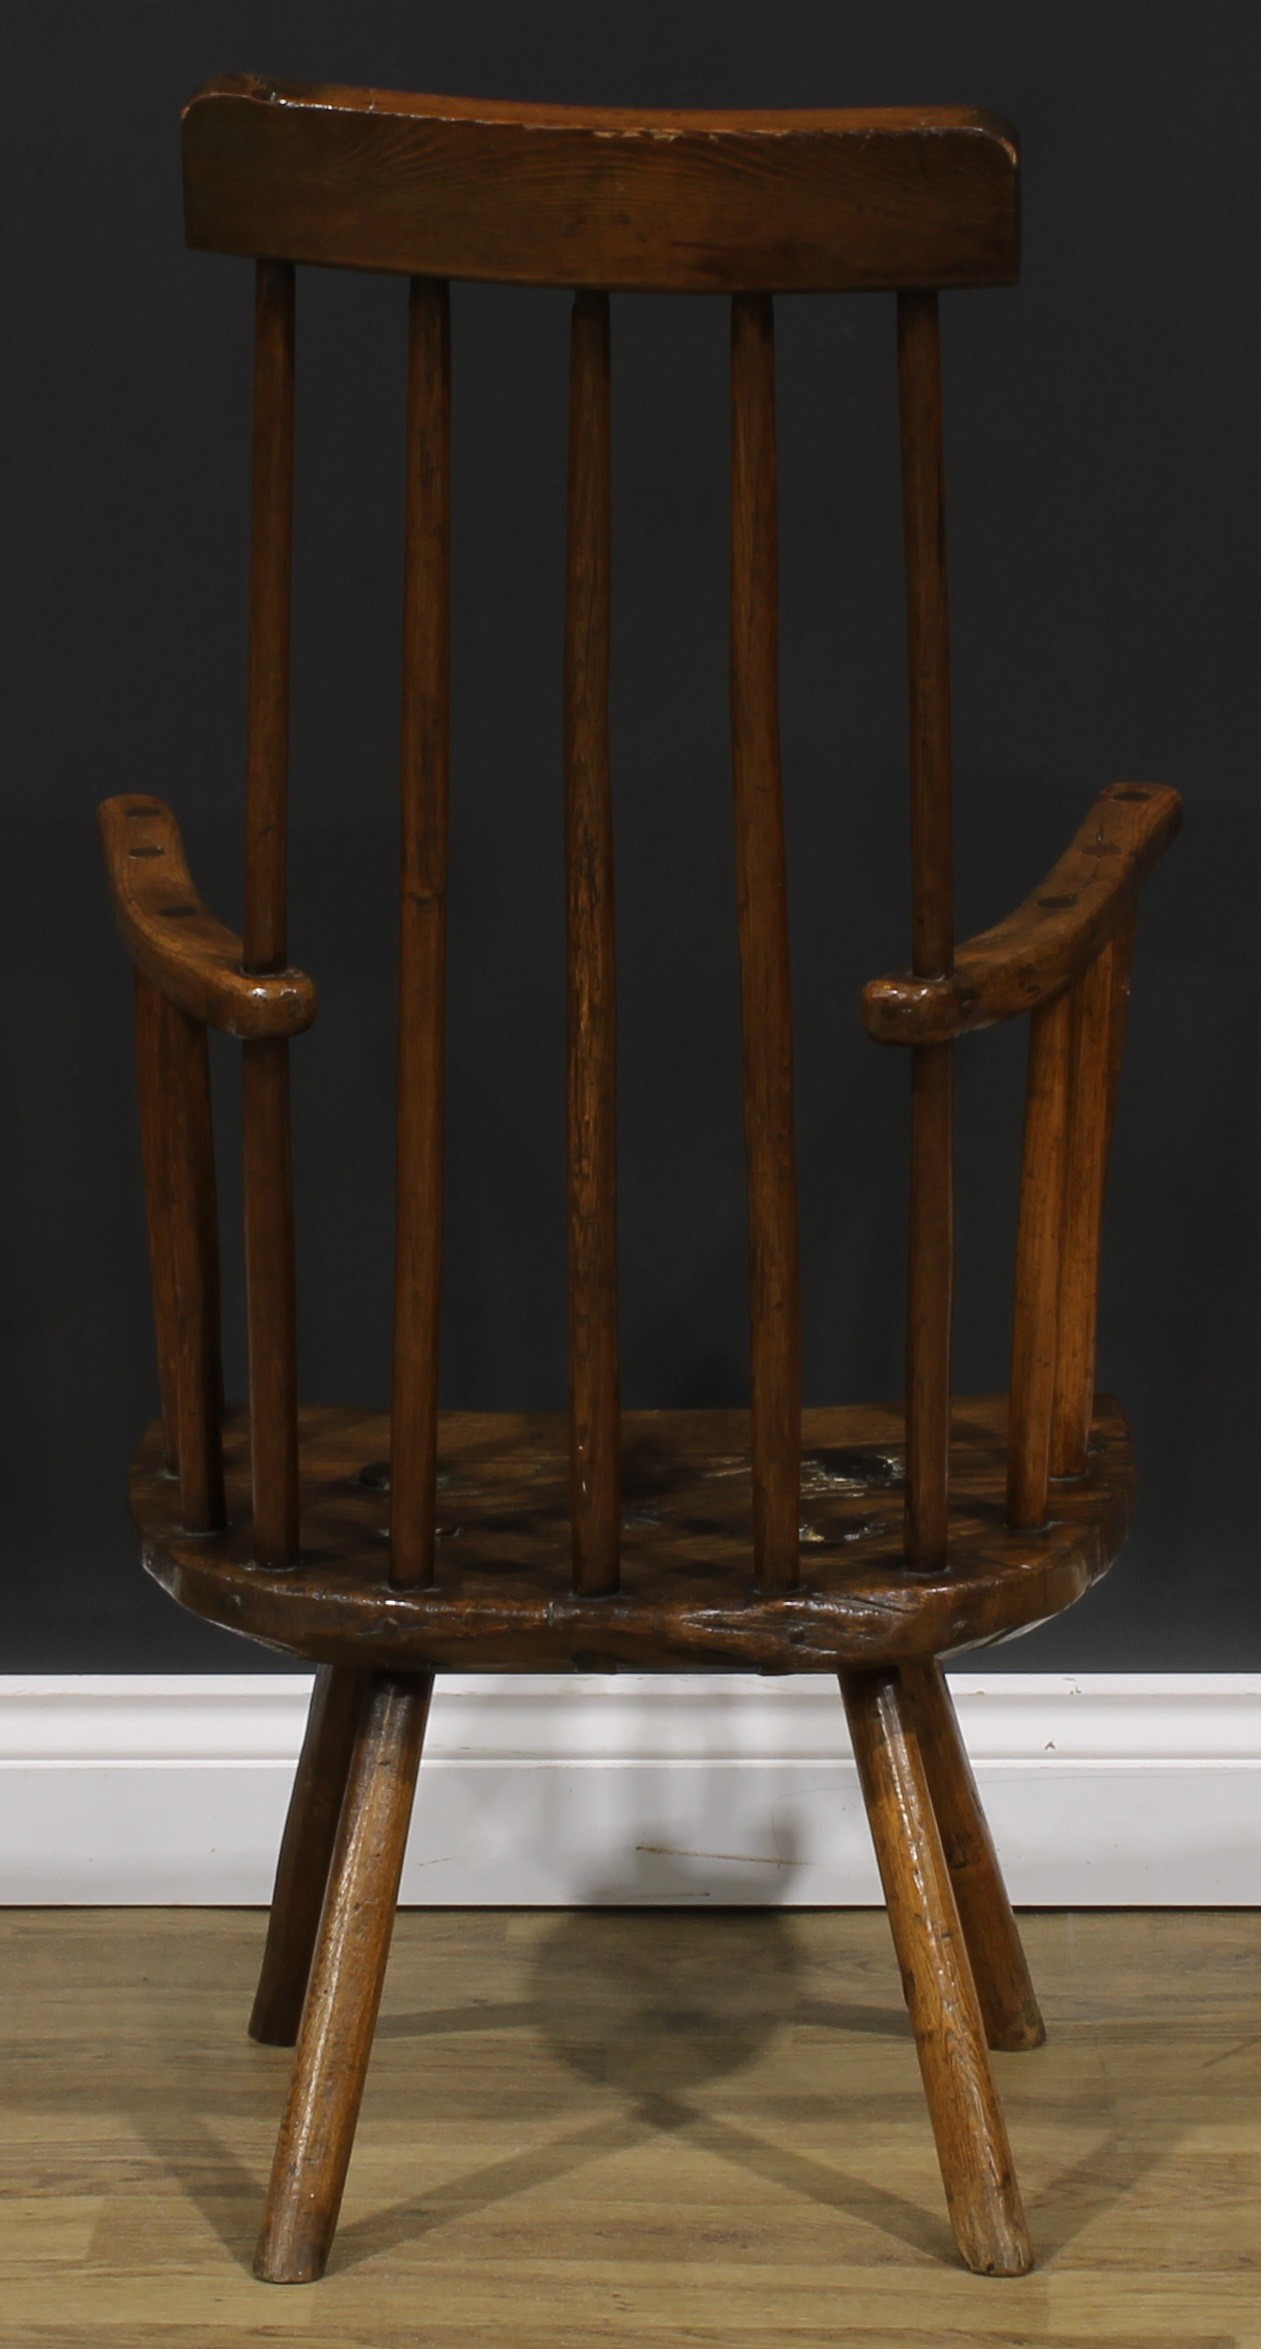 A 19th century Irish ash and elm primary hedge or famine chair, of traditional vernacular form, 99cm - Image 4 of 4